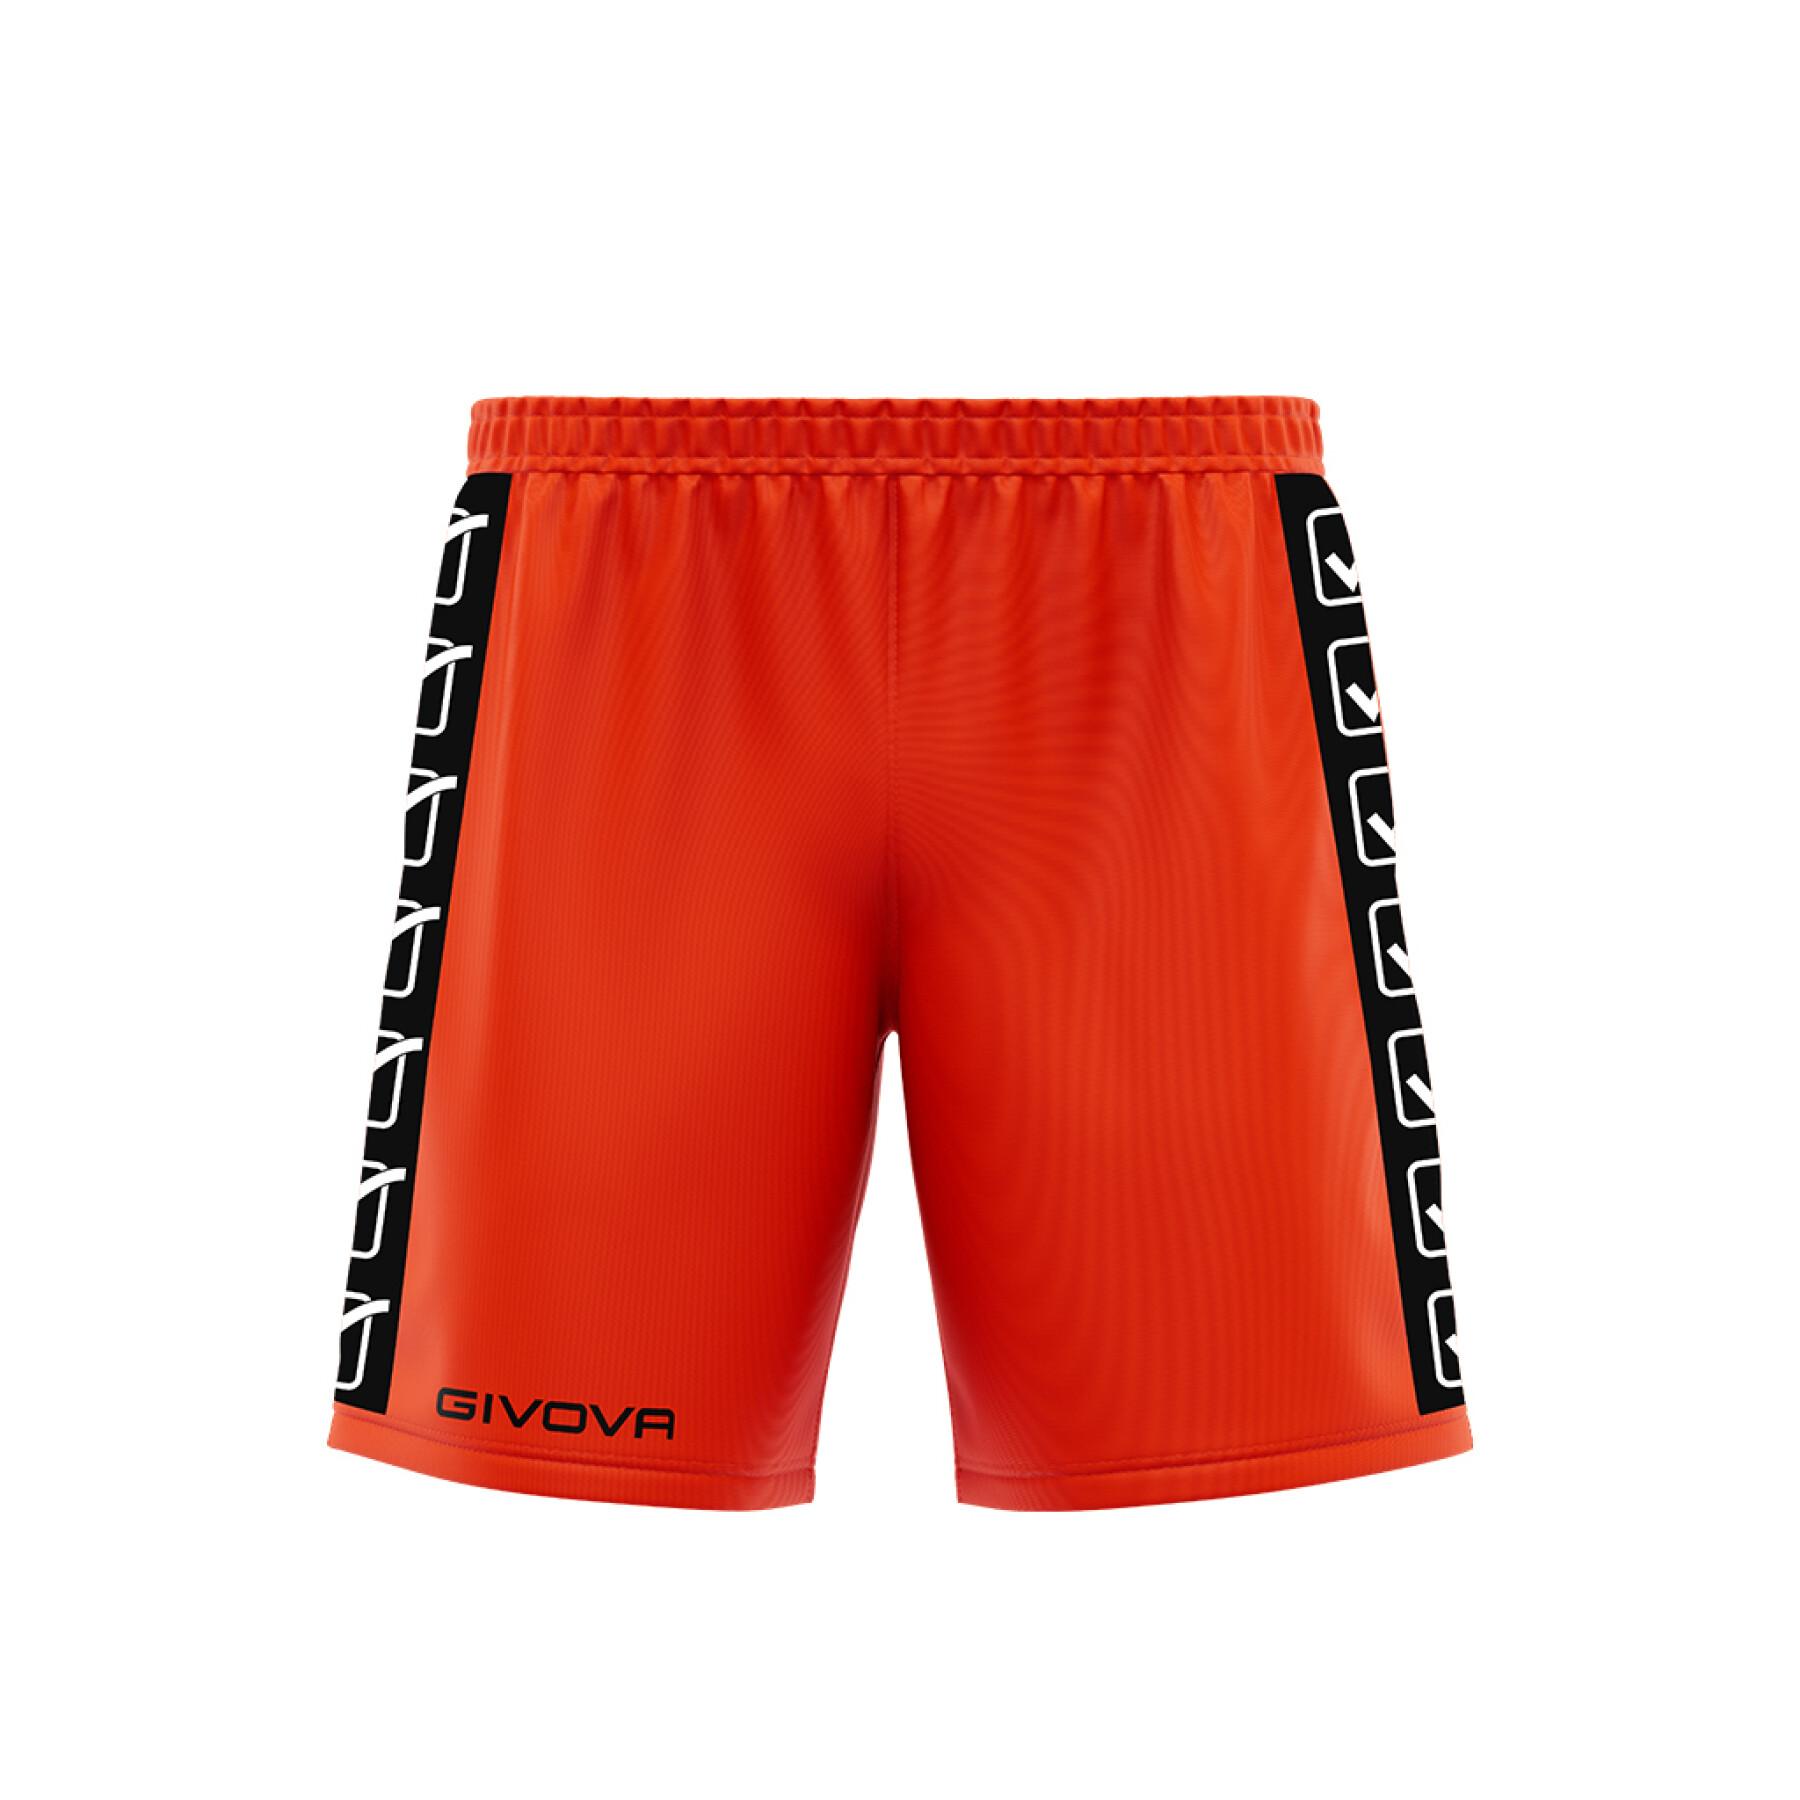 Trendsetting basketball padded compression shorts For Leisure And